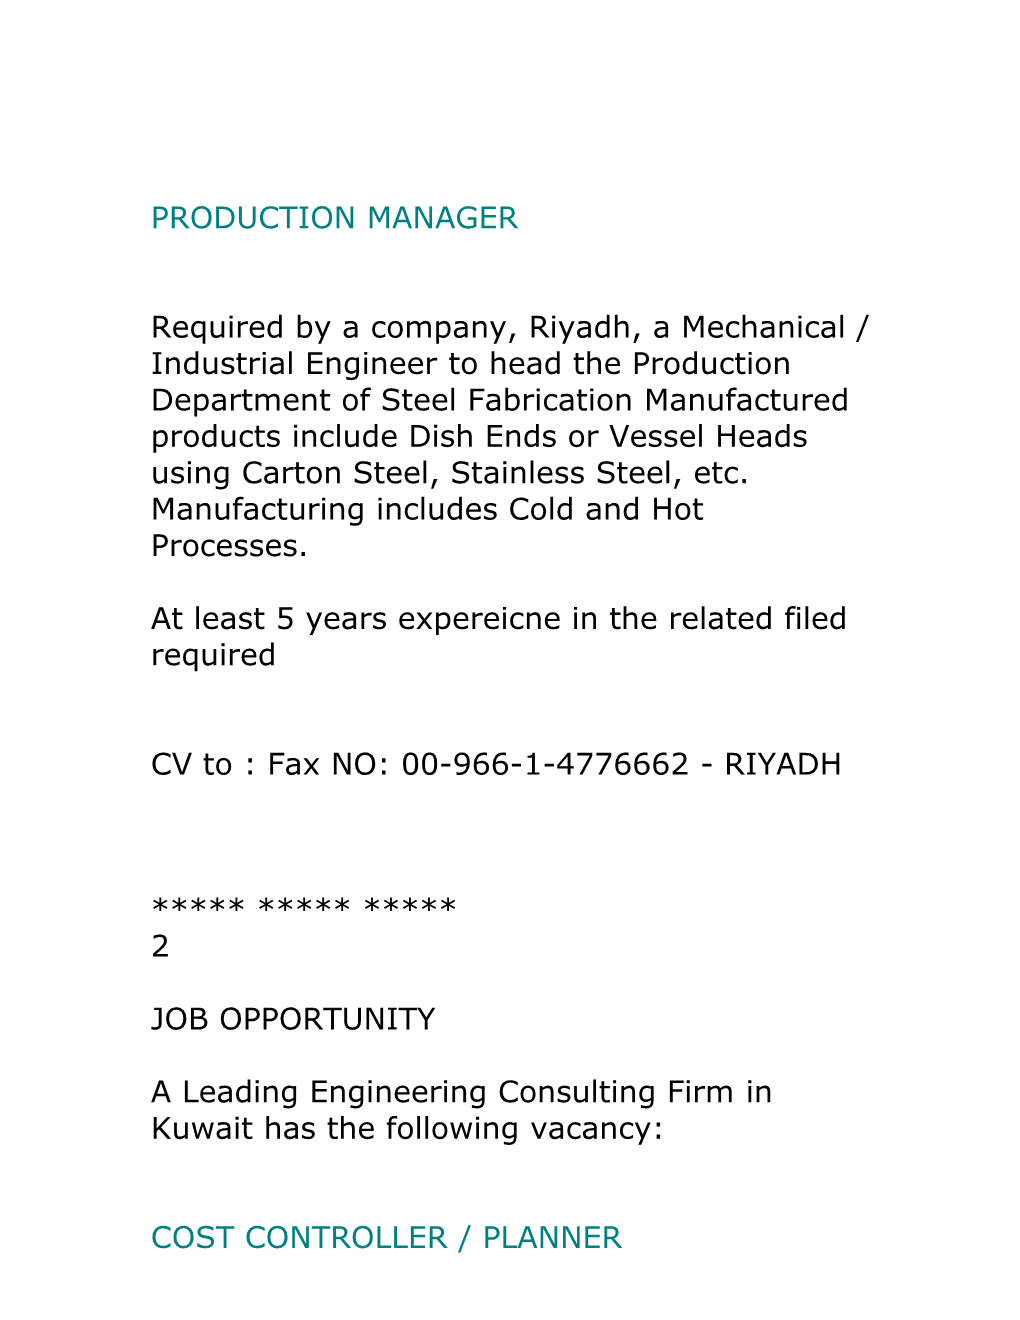 NESPAK Needs Engineers (Road/Highway) for MOT Projects in KSA(Civil,Material, Electrical